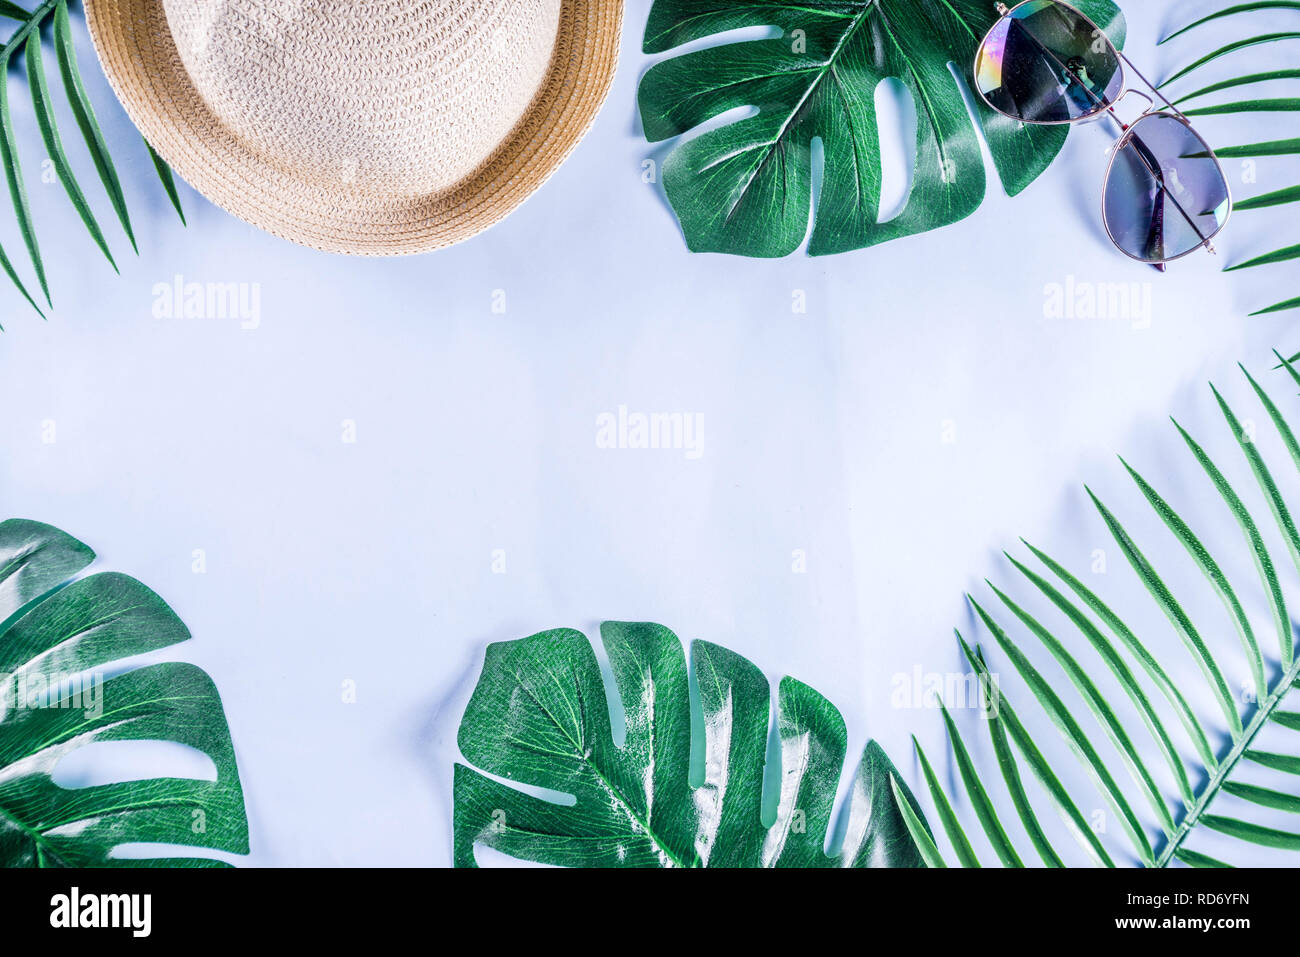 Colorful summer vacation and holiday flat-lay. Straw hat, sunglasses, palm and monstera leaves on bright blue yellow background, top view, copy space Stock Photo